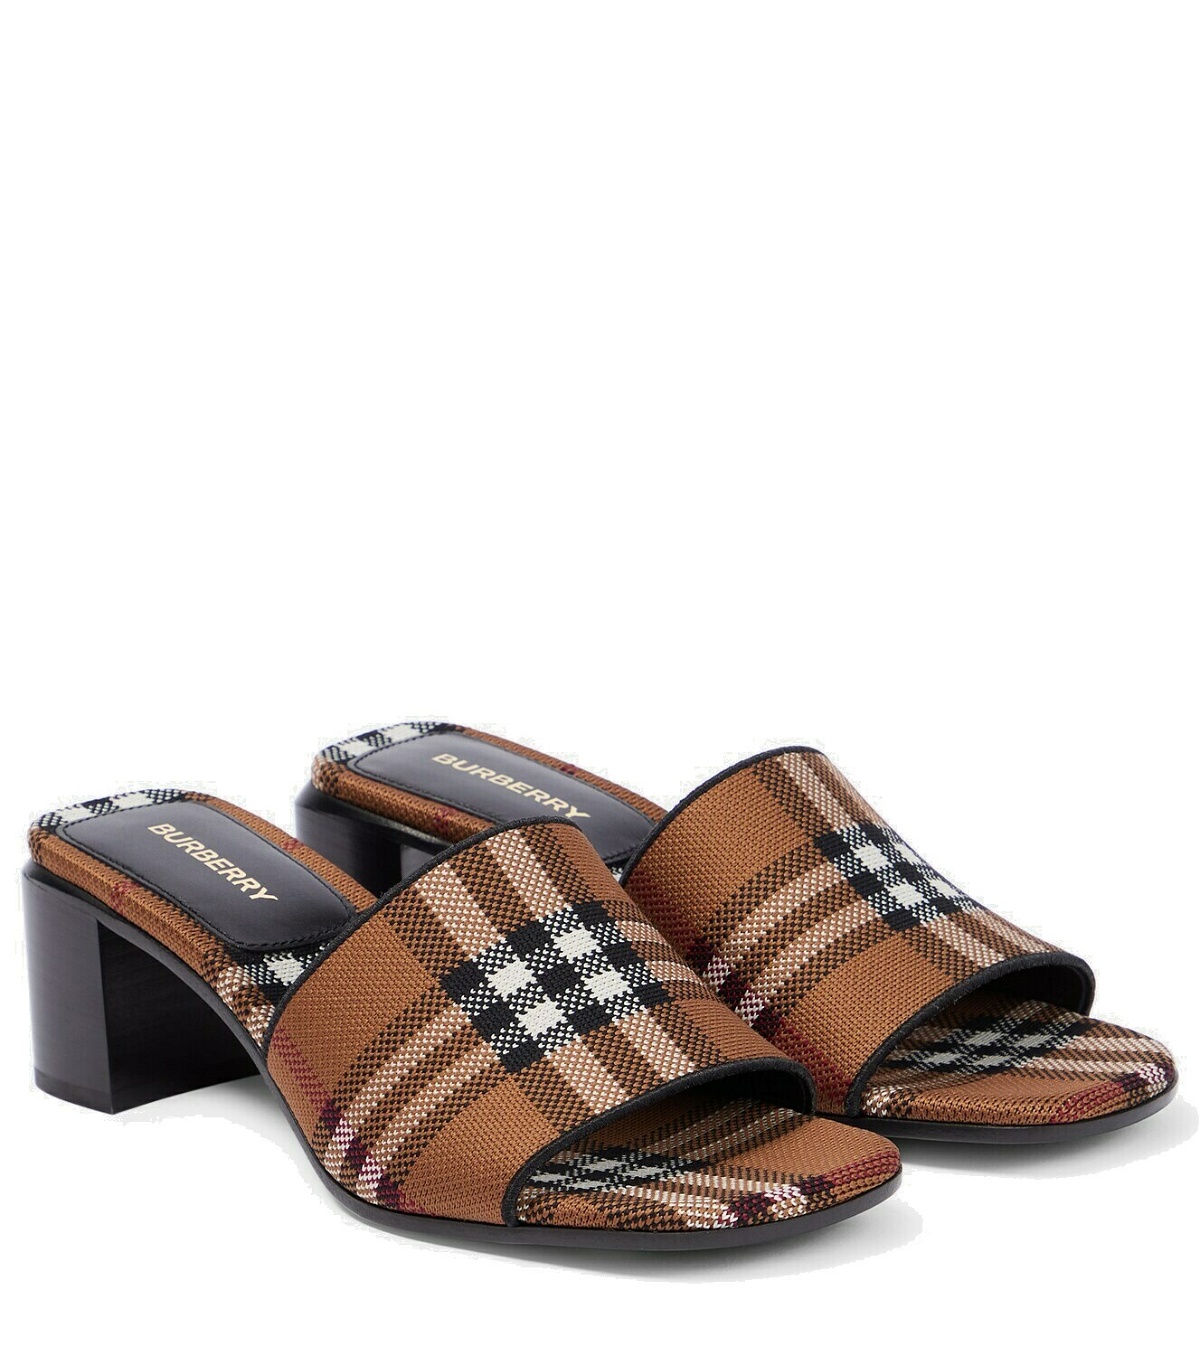 Burberry - Checked mules Burberry